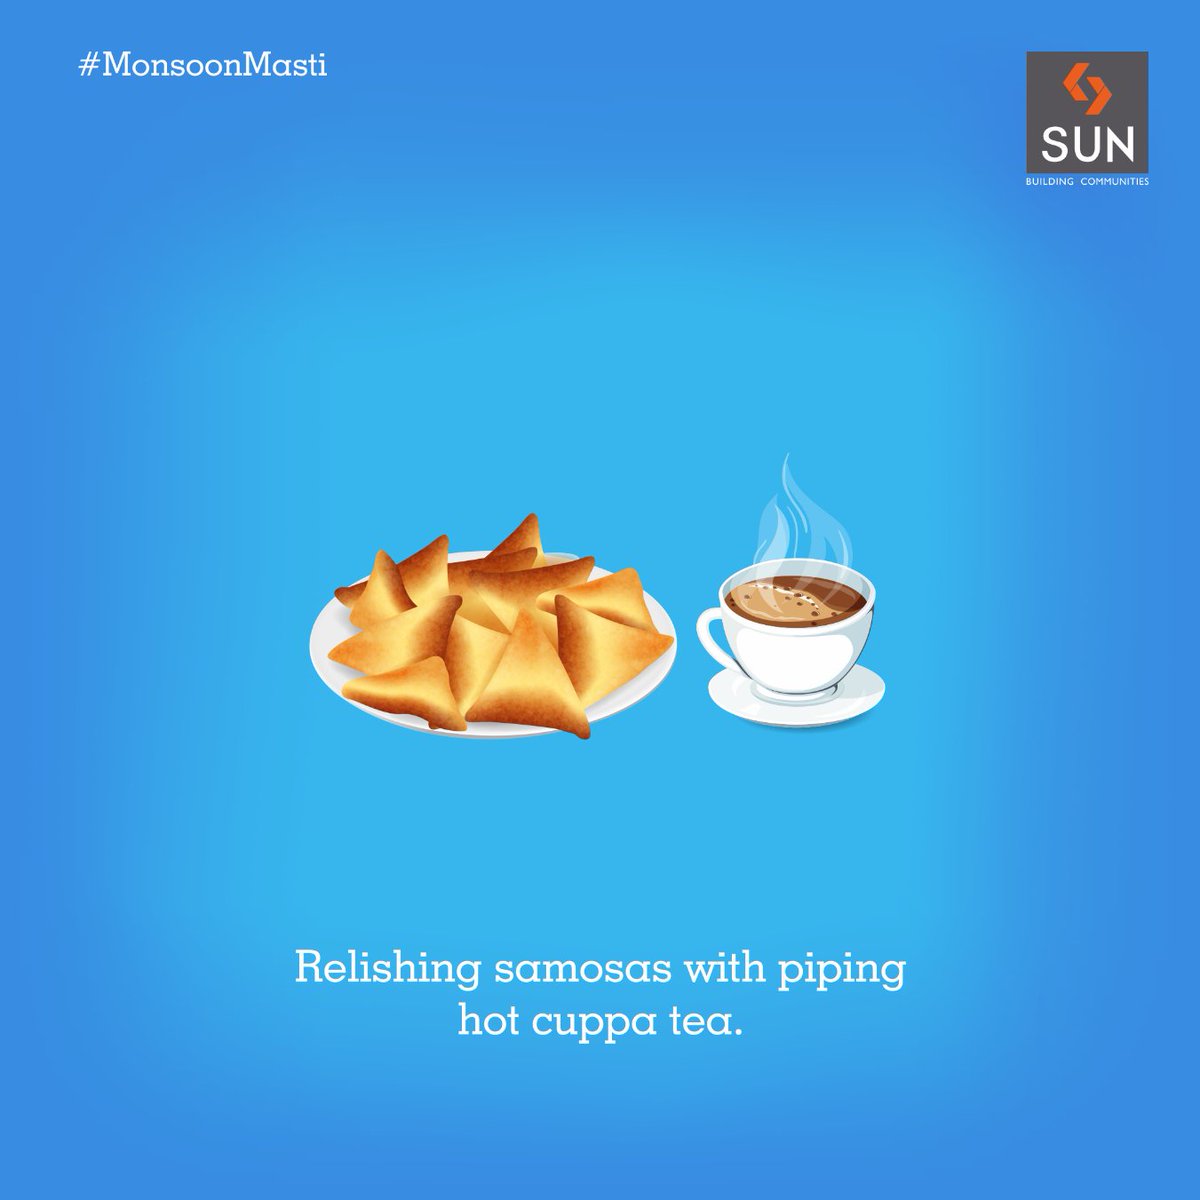 #MonsoonMasti
The downpour never fails to bring out the foodie in us. https://t.co/tF7UN0ZjSY